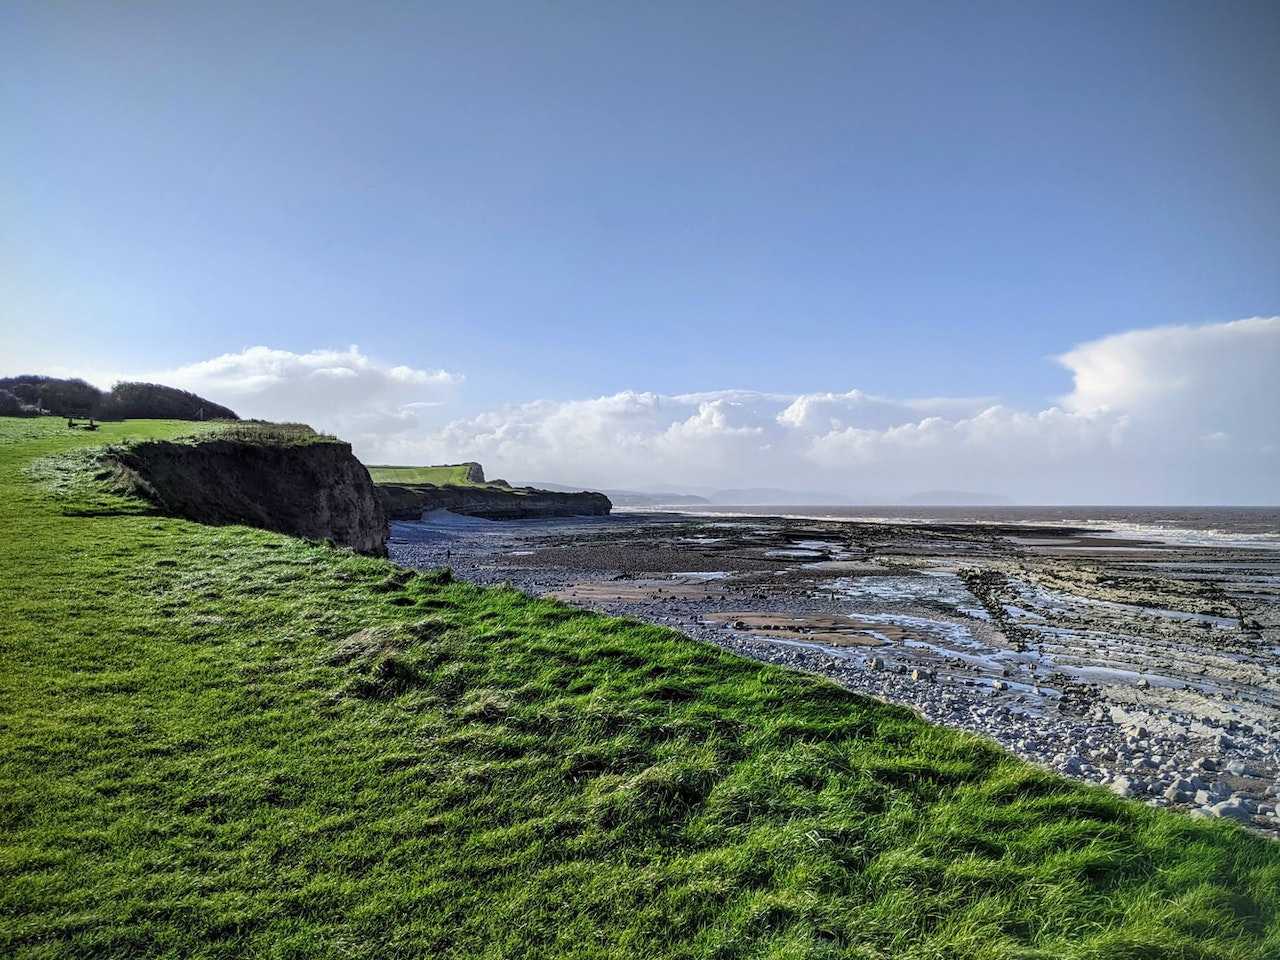 Kilve from the grassy area behind the beach